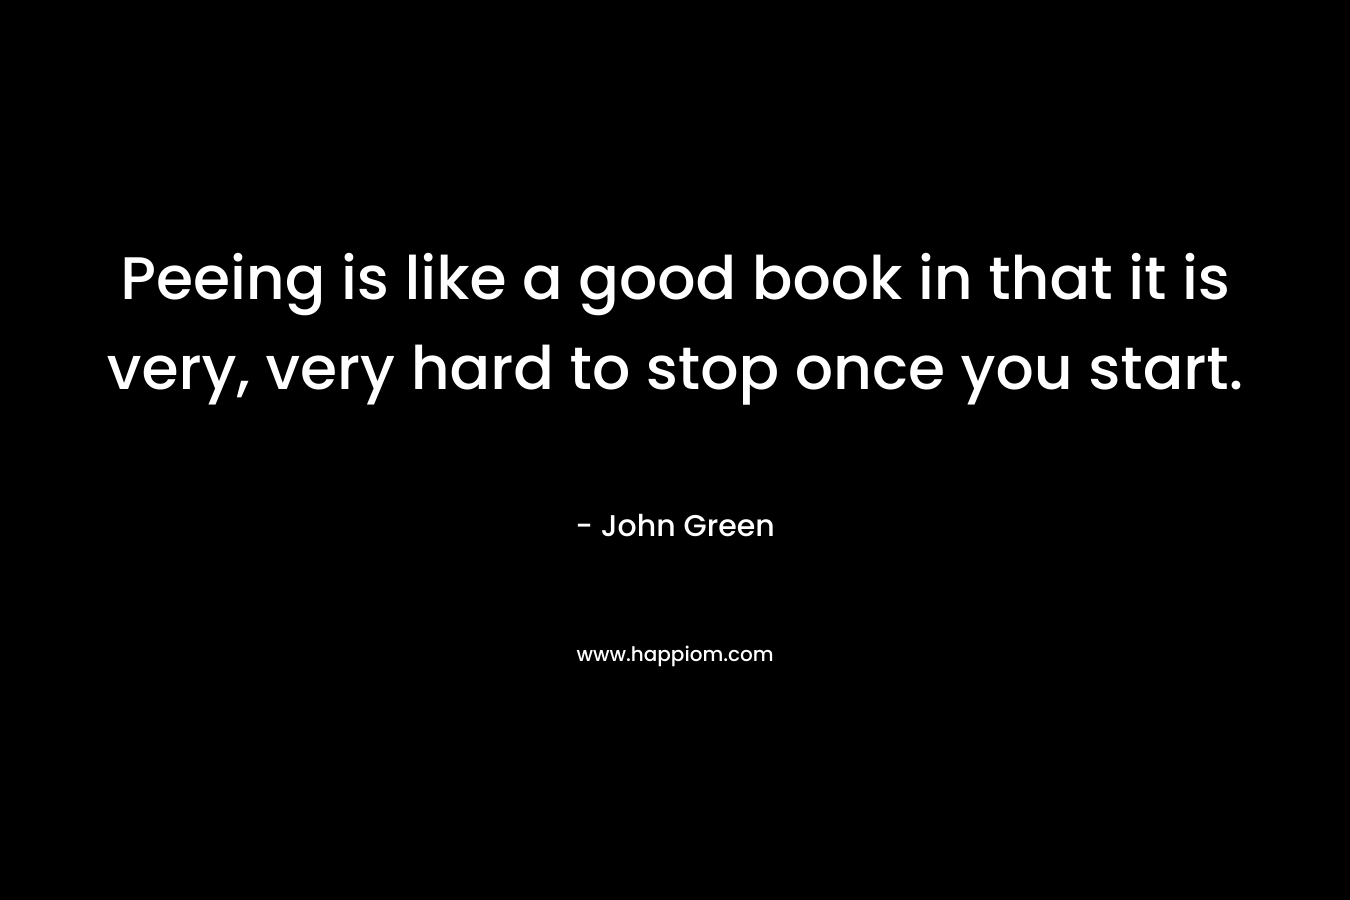 Peeing is like a good book in that it is very, very hard to stop once you start. – John Green